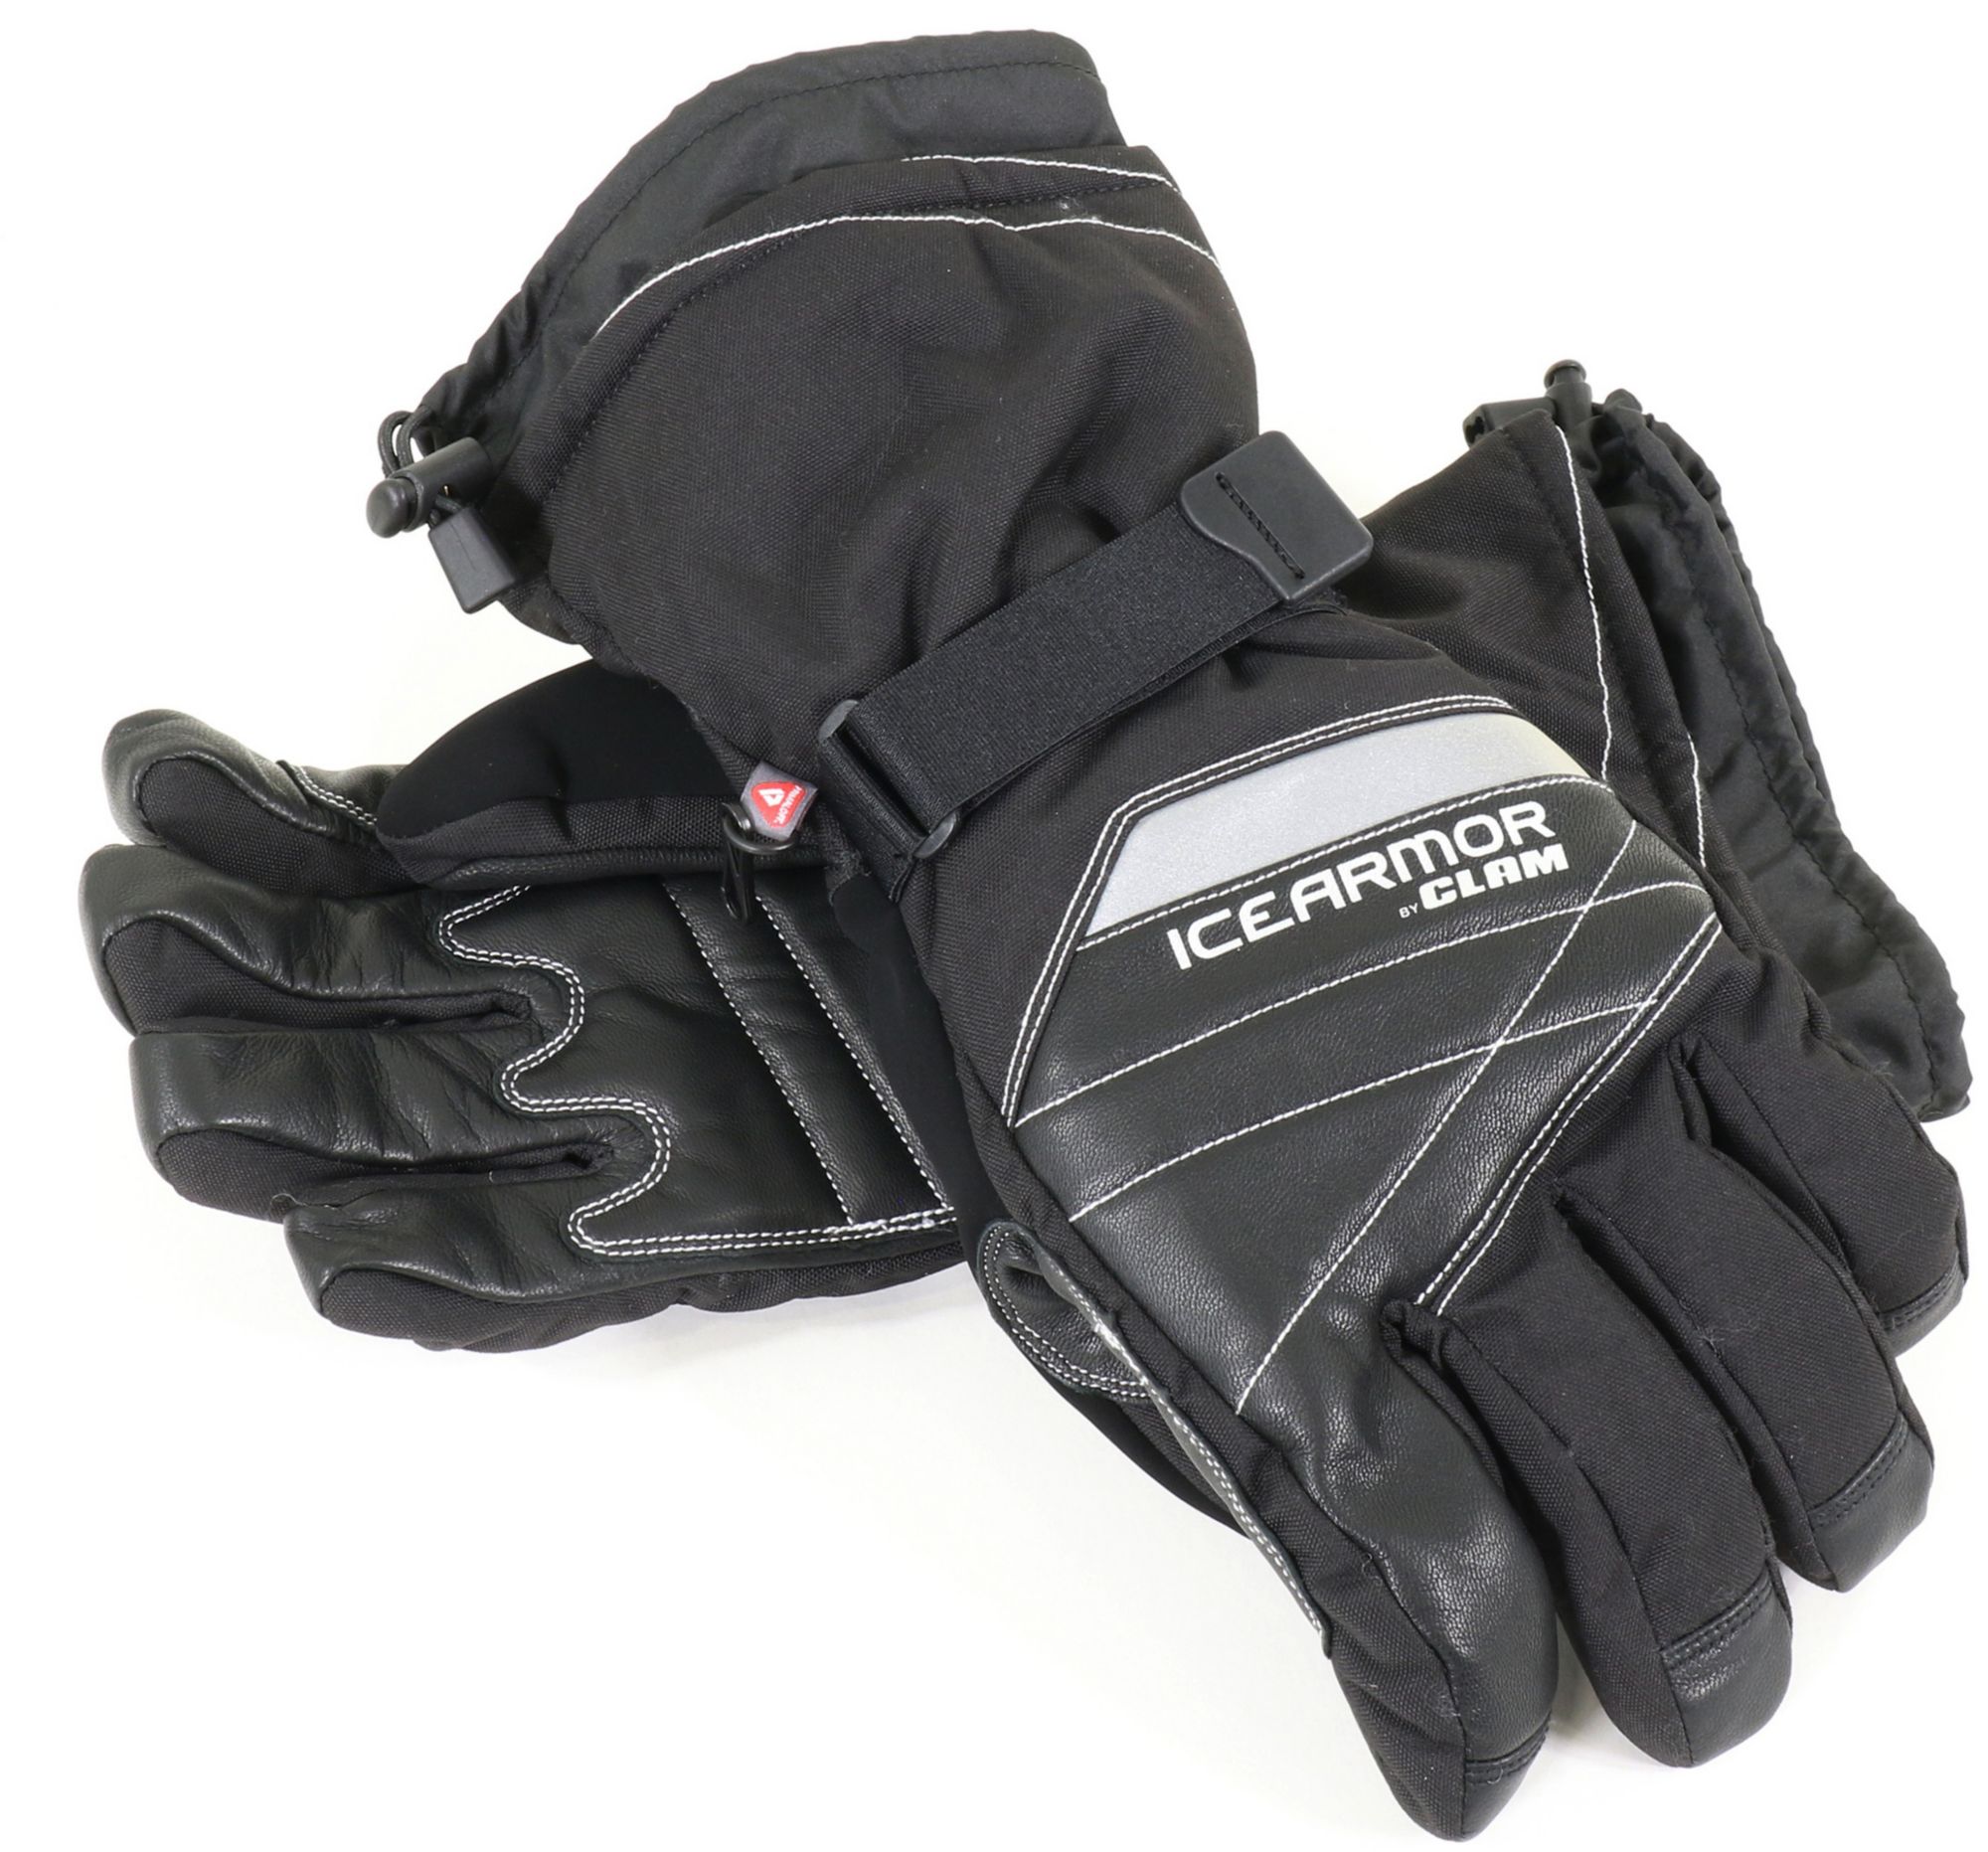 Photos - Other for Fishing Clam Outdoors Renegade Glove, Men's, XL, Black 23CLOMRNGDGLVBLCKFIC